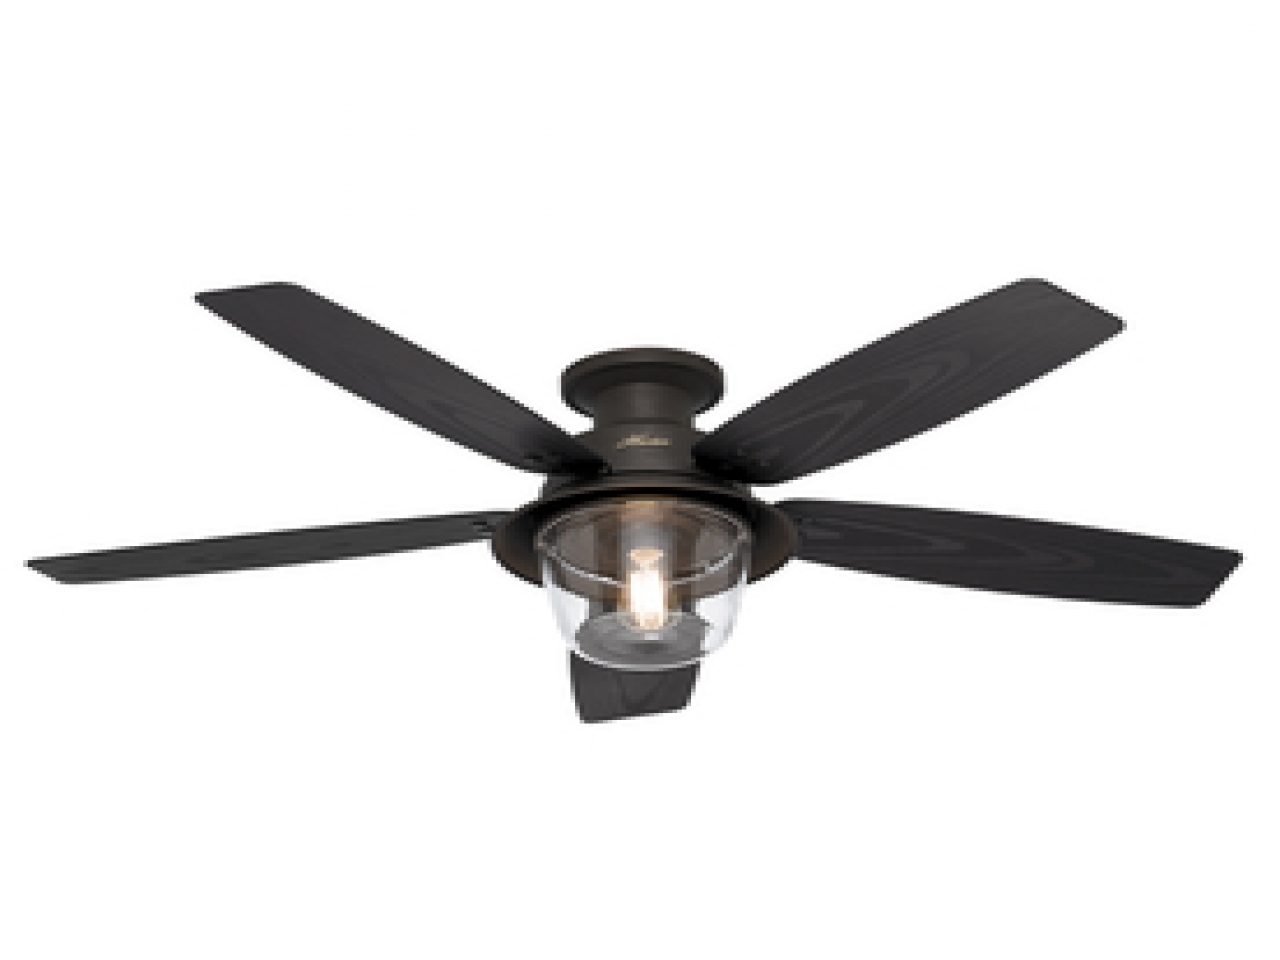 Permalink to Small Outdoor Ceiling Fan With Light